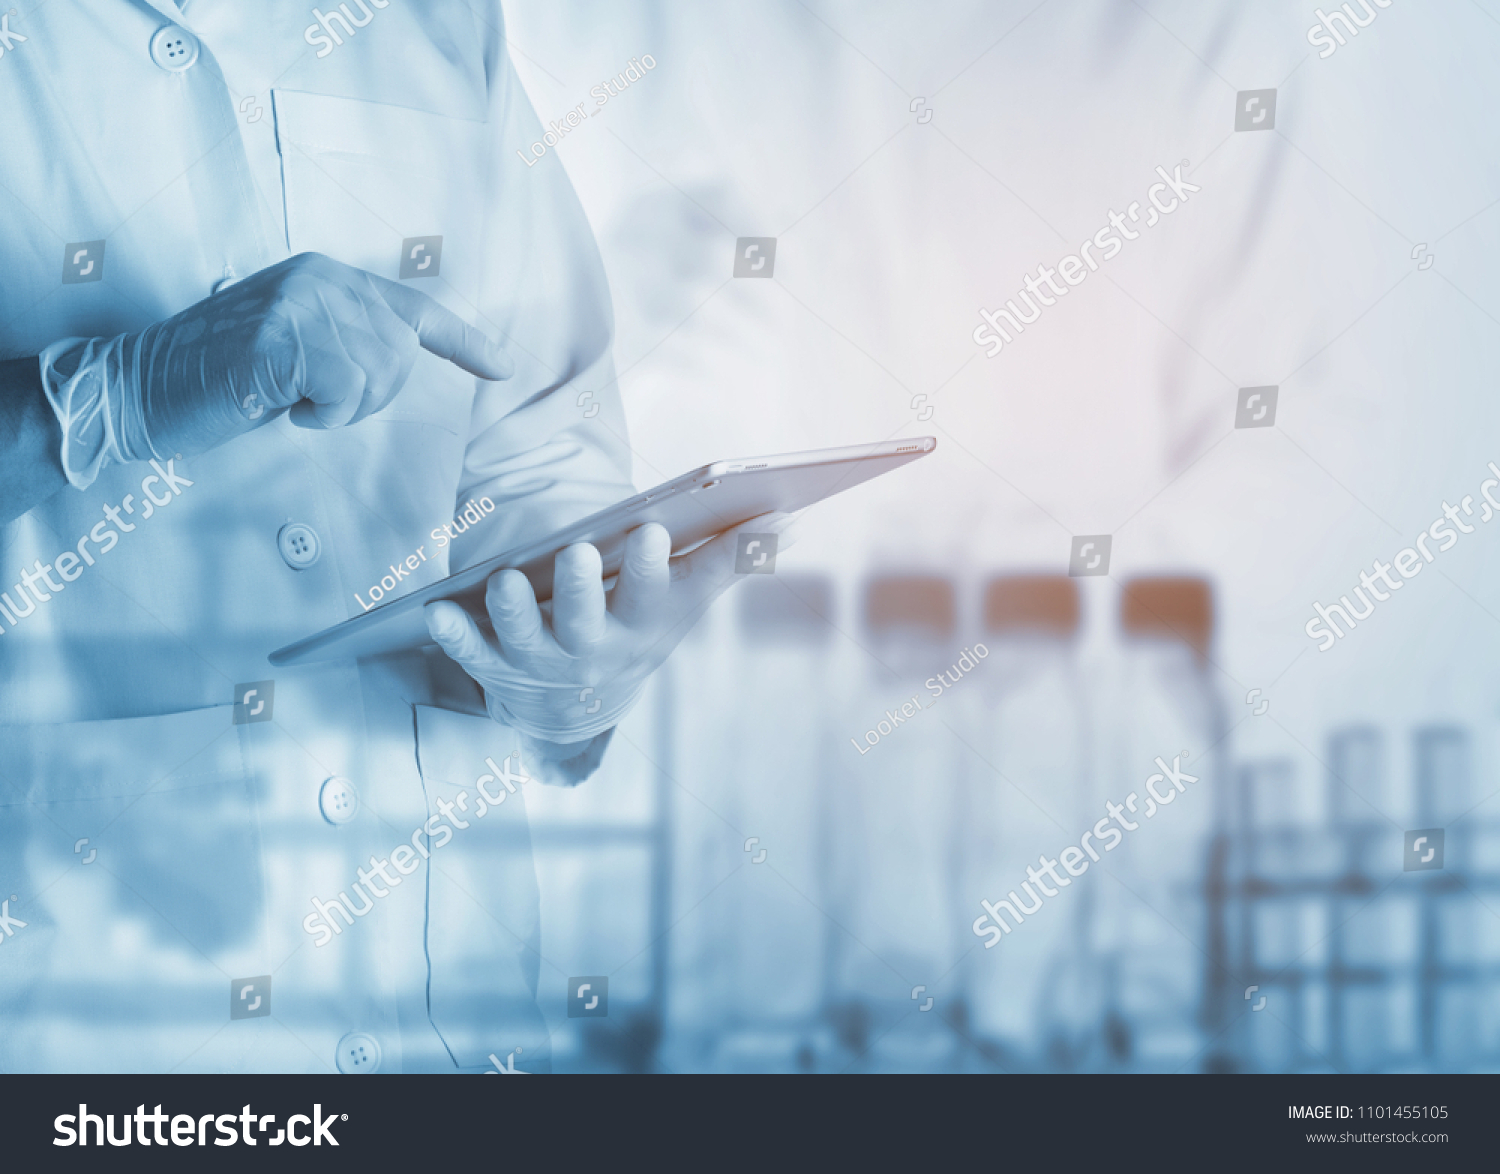 scientist using tablet in the laboratory,Laboratory research concept,science background #1101455105